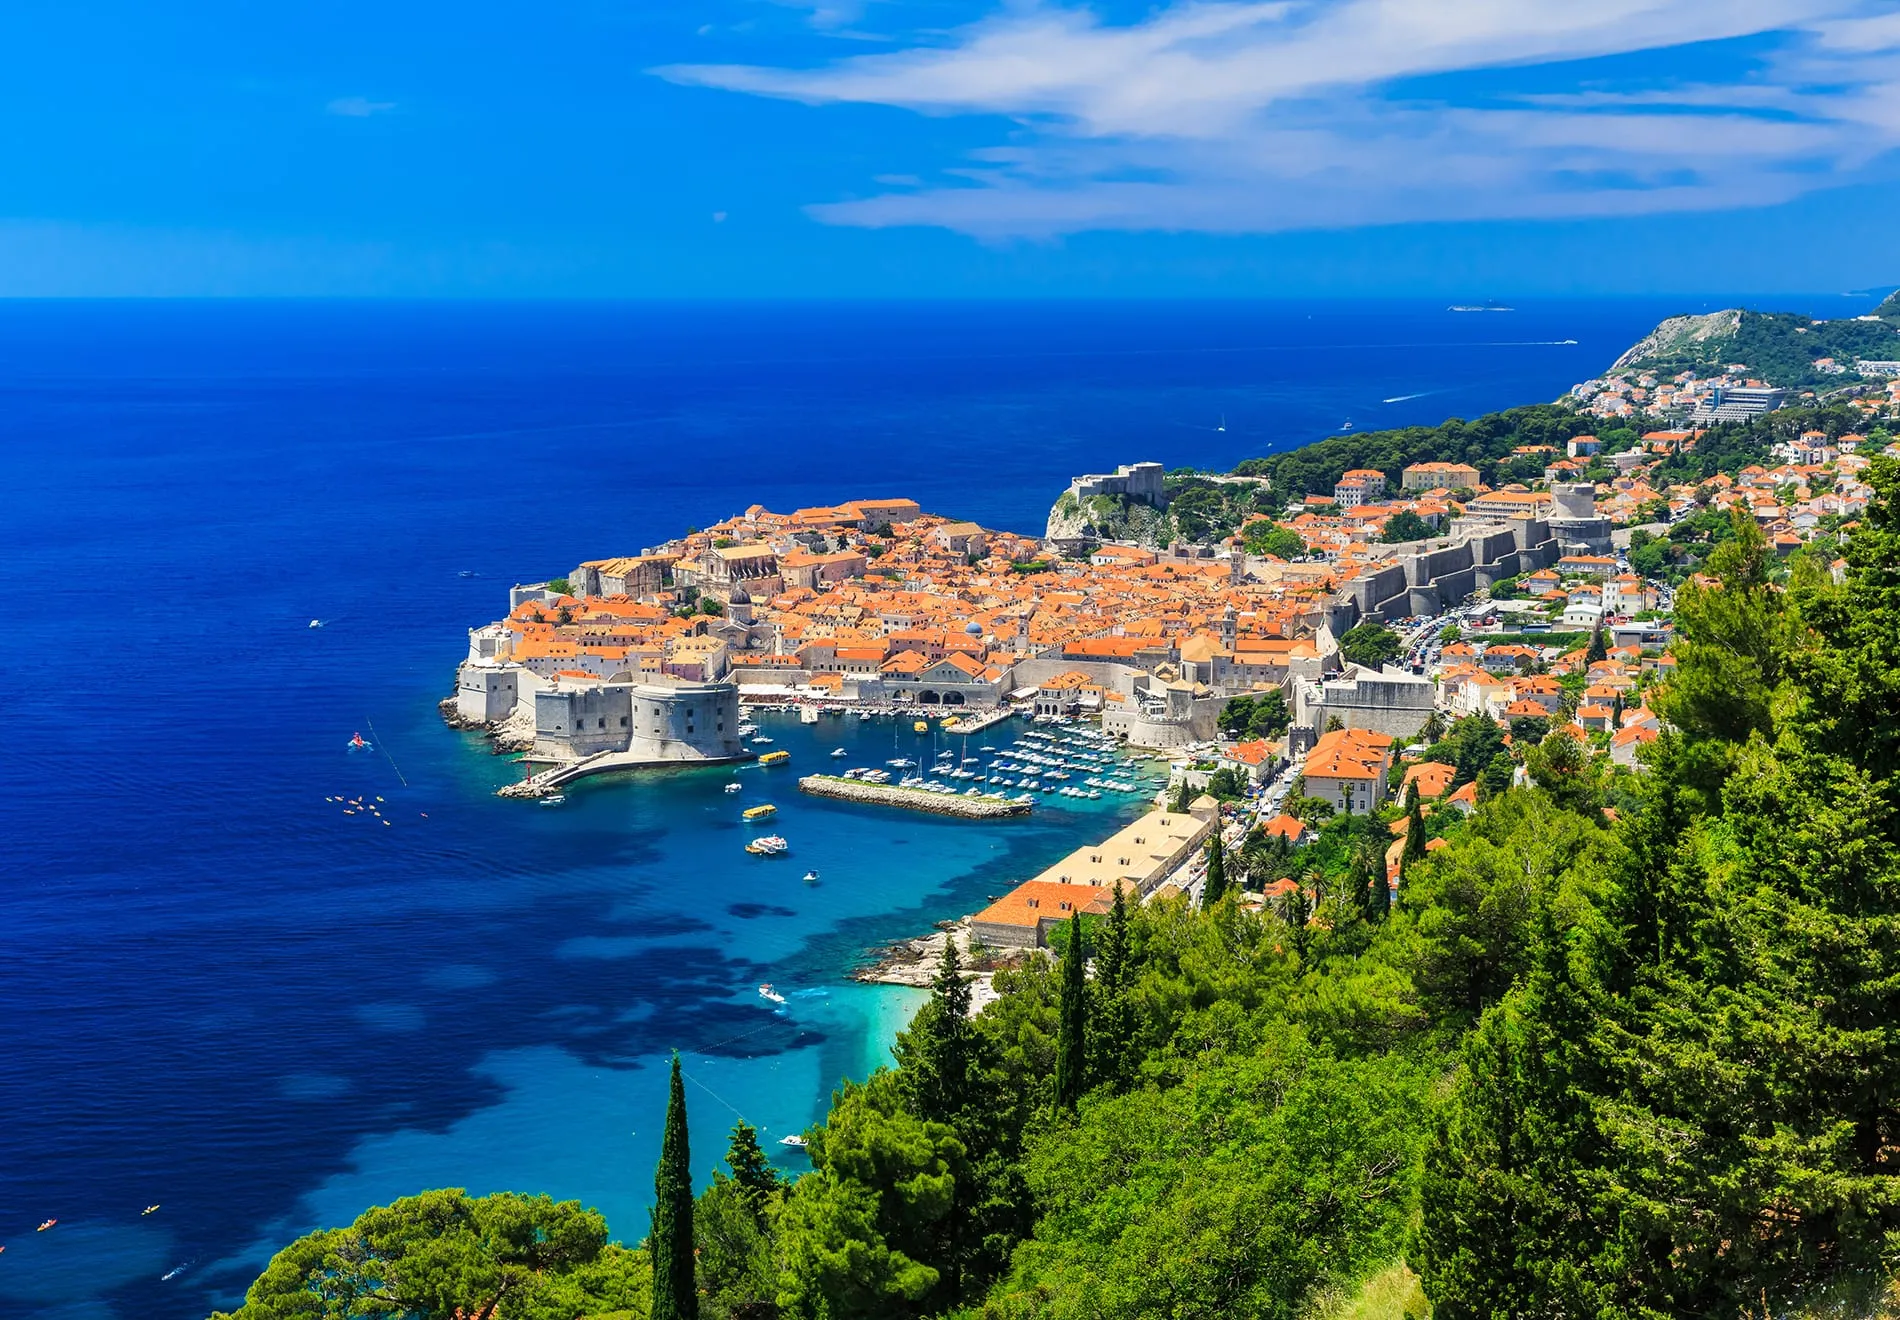 A panoramic view of the walled city Dubrovnik Croatia